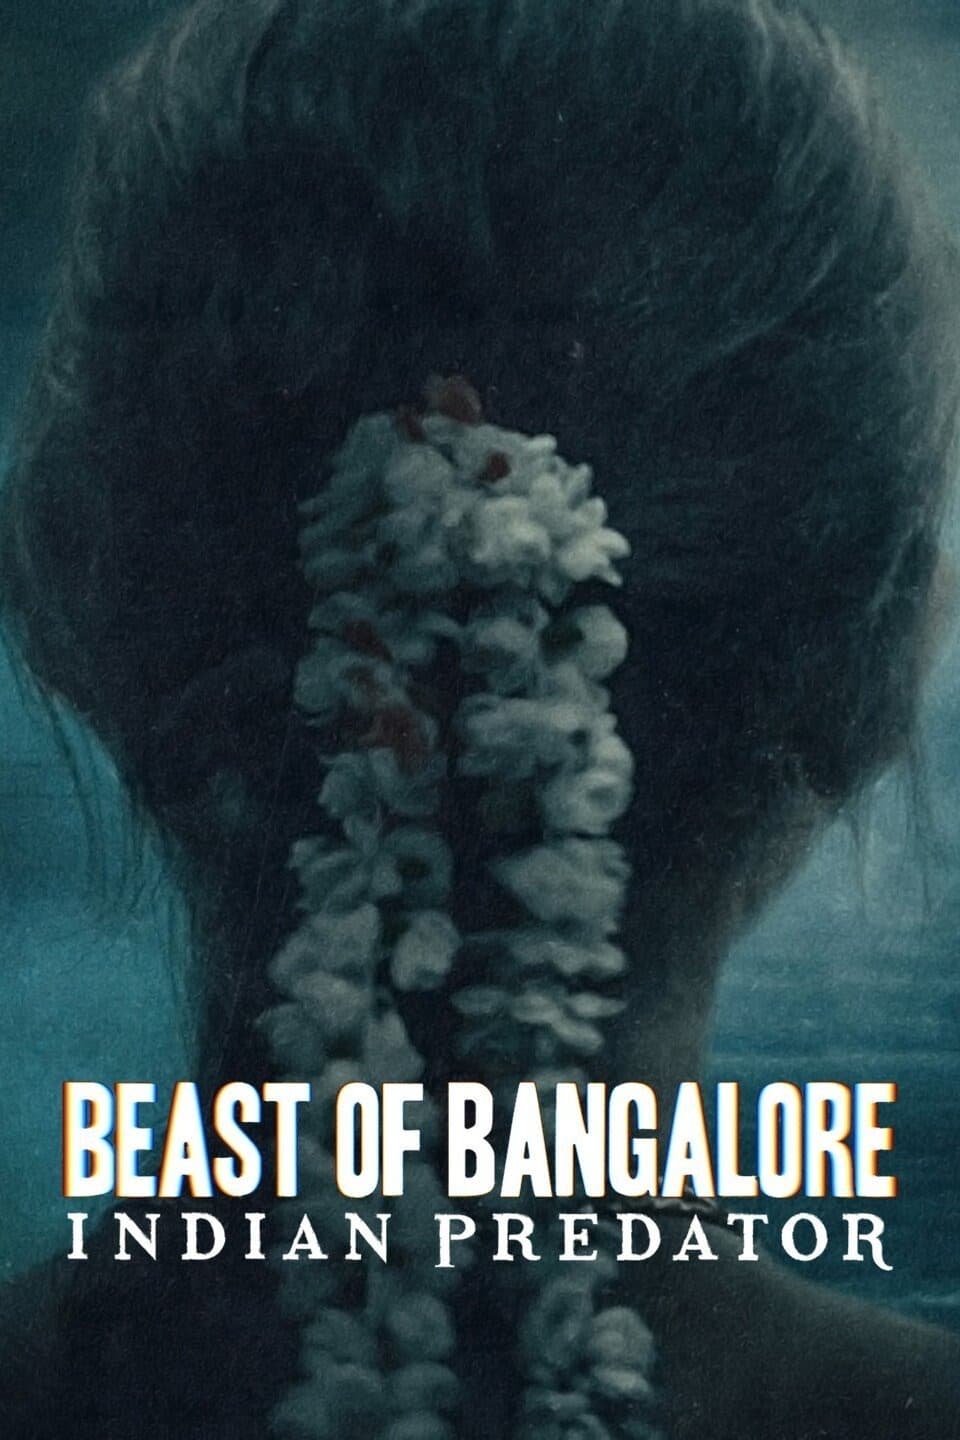 Beast of Bangalore: Indian Predator TV Shows About Crime